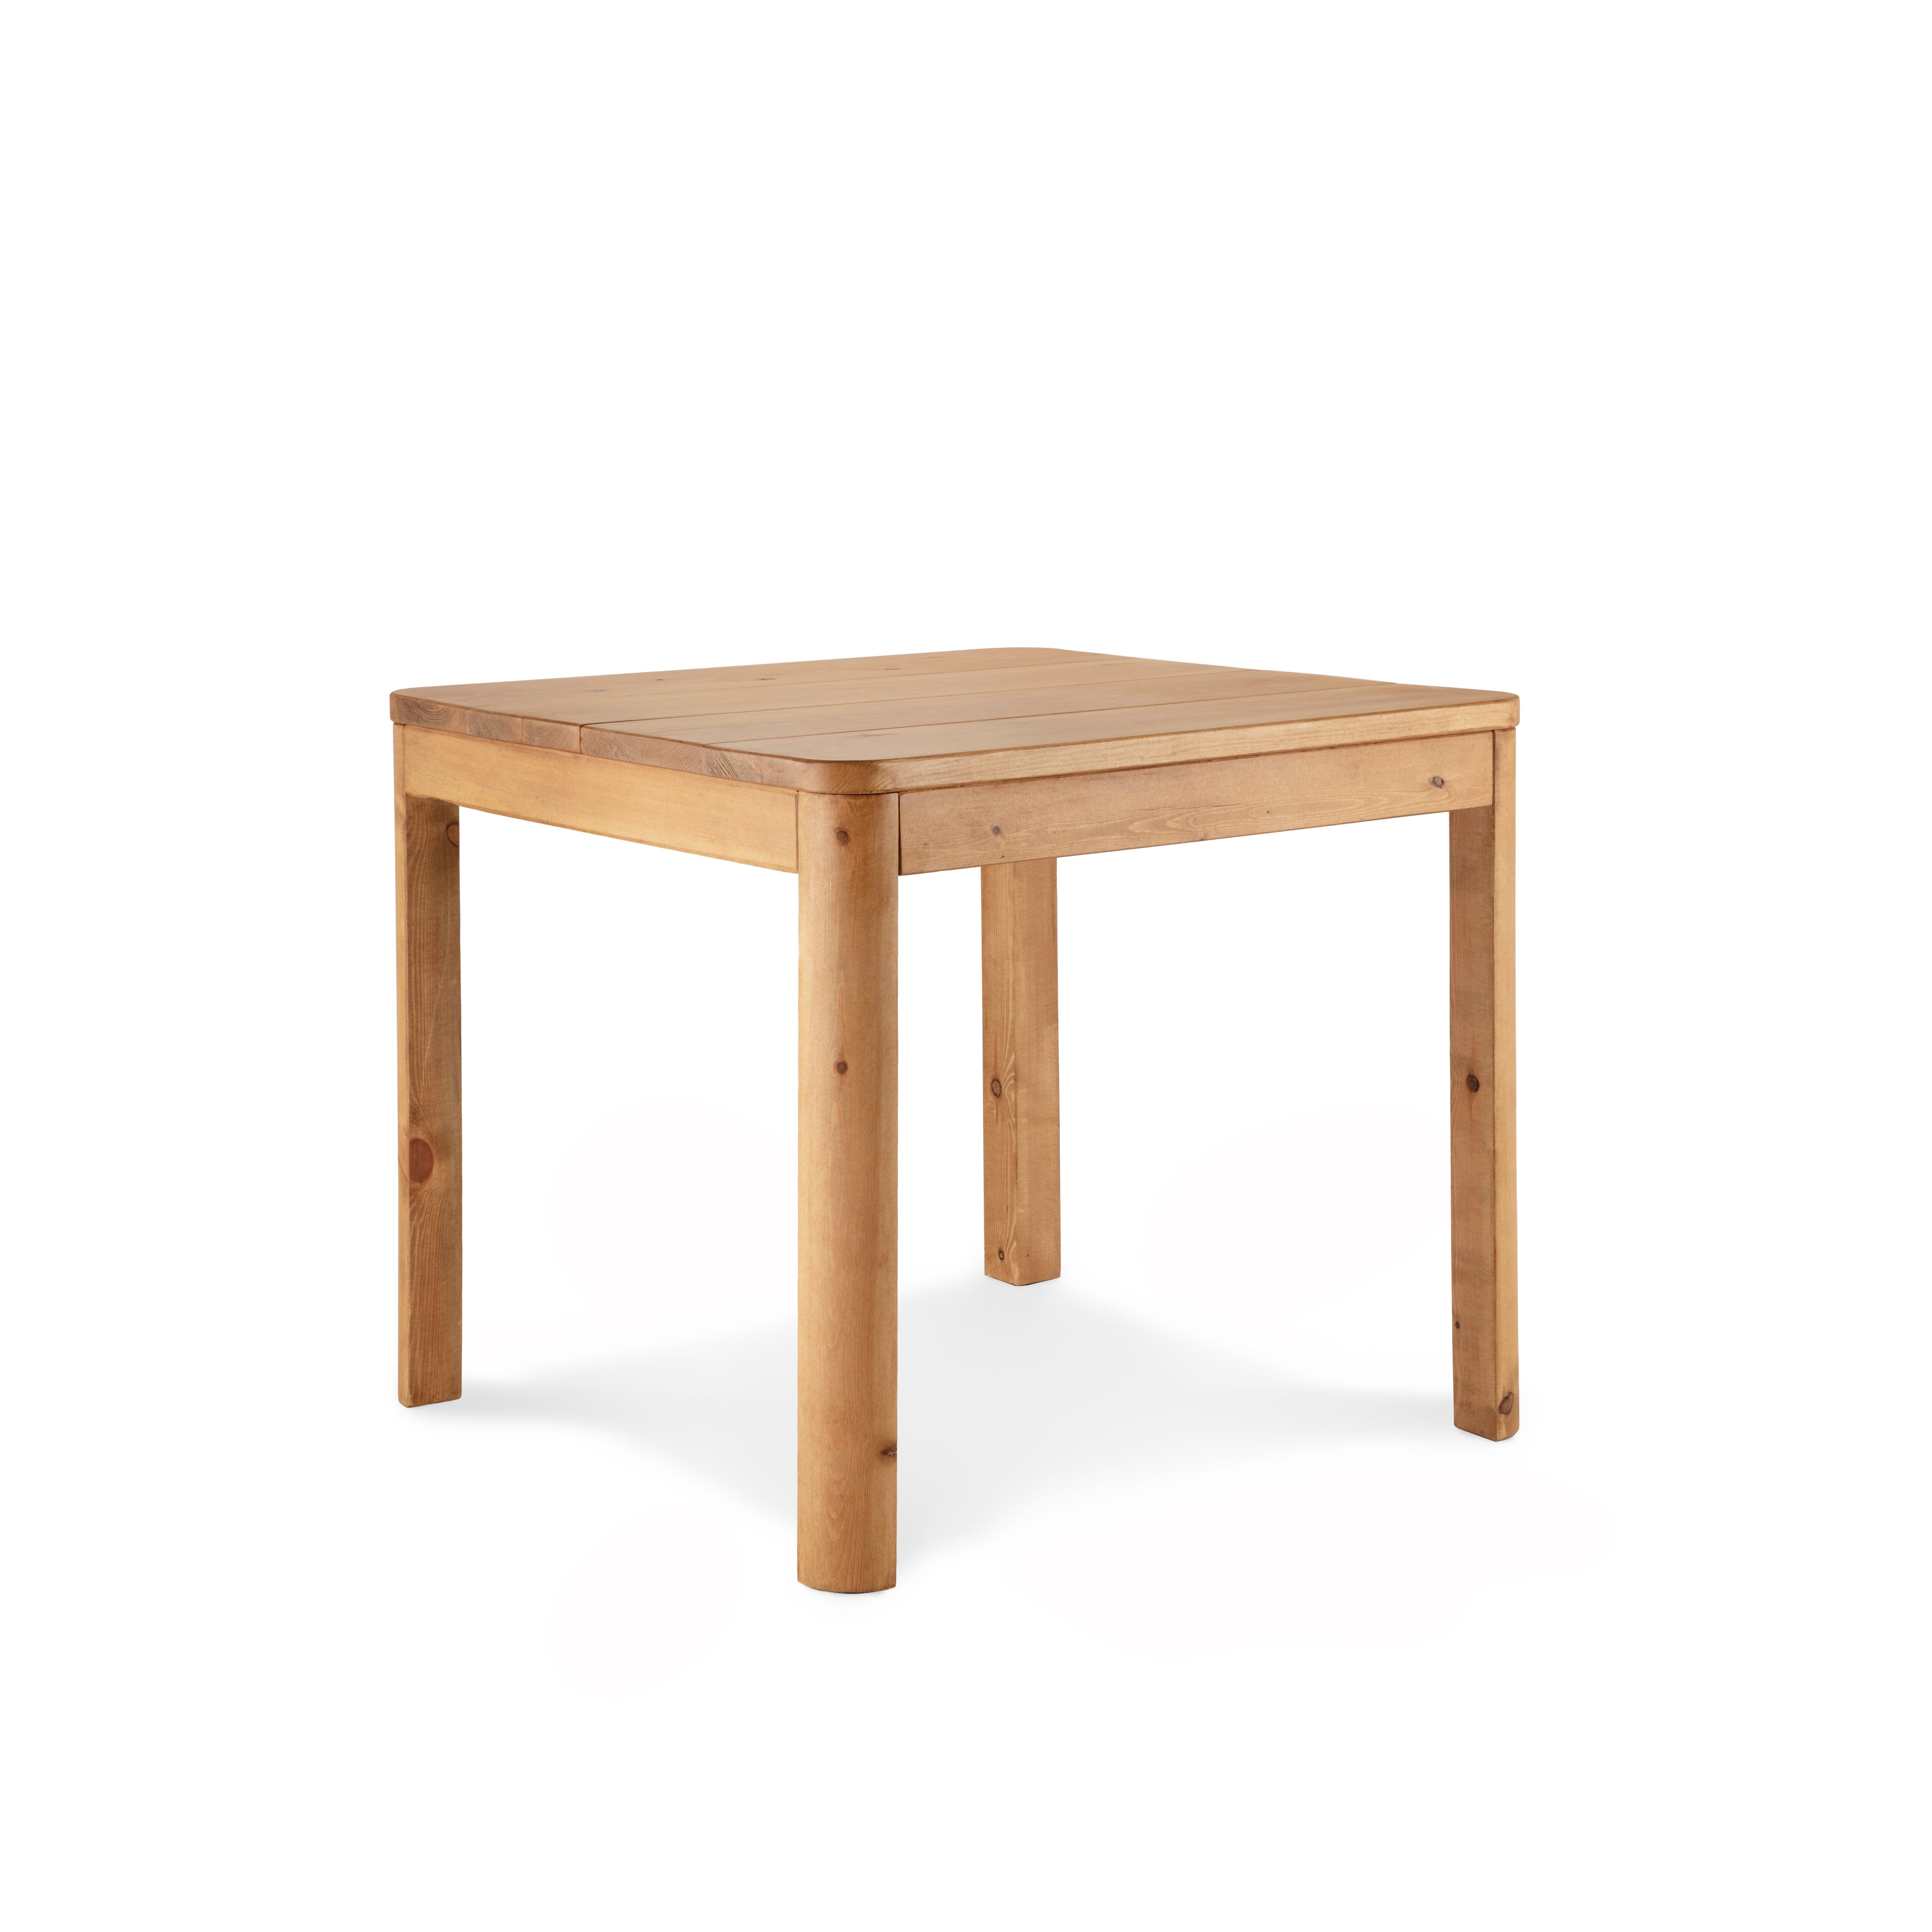 Gosforth Square Dining Table